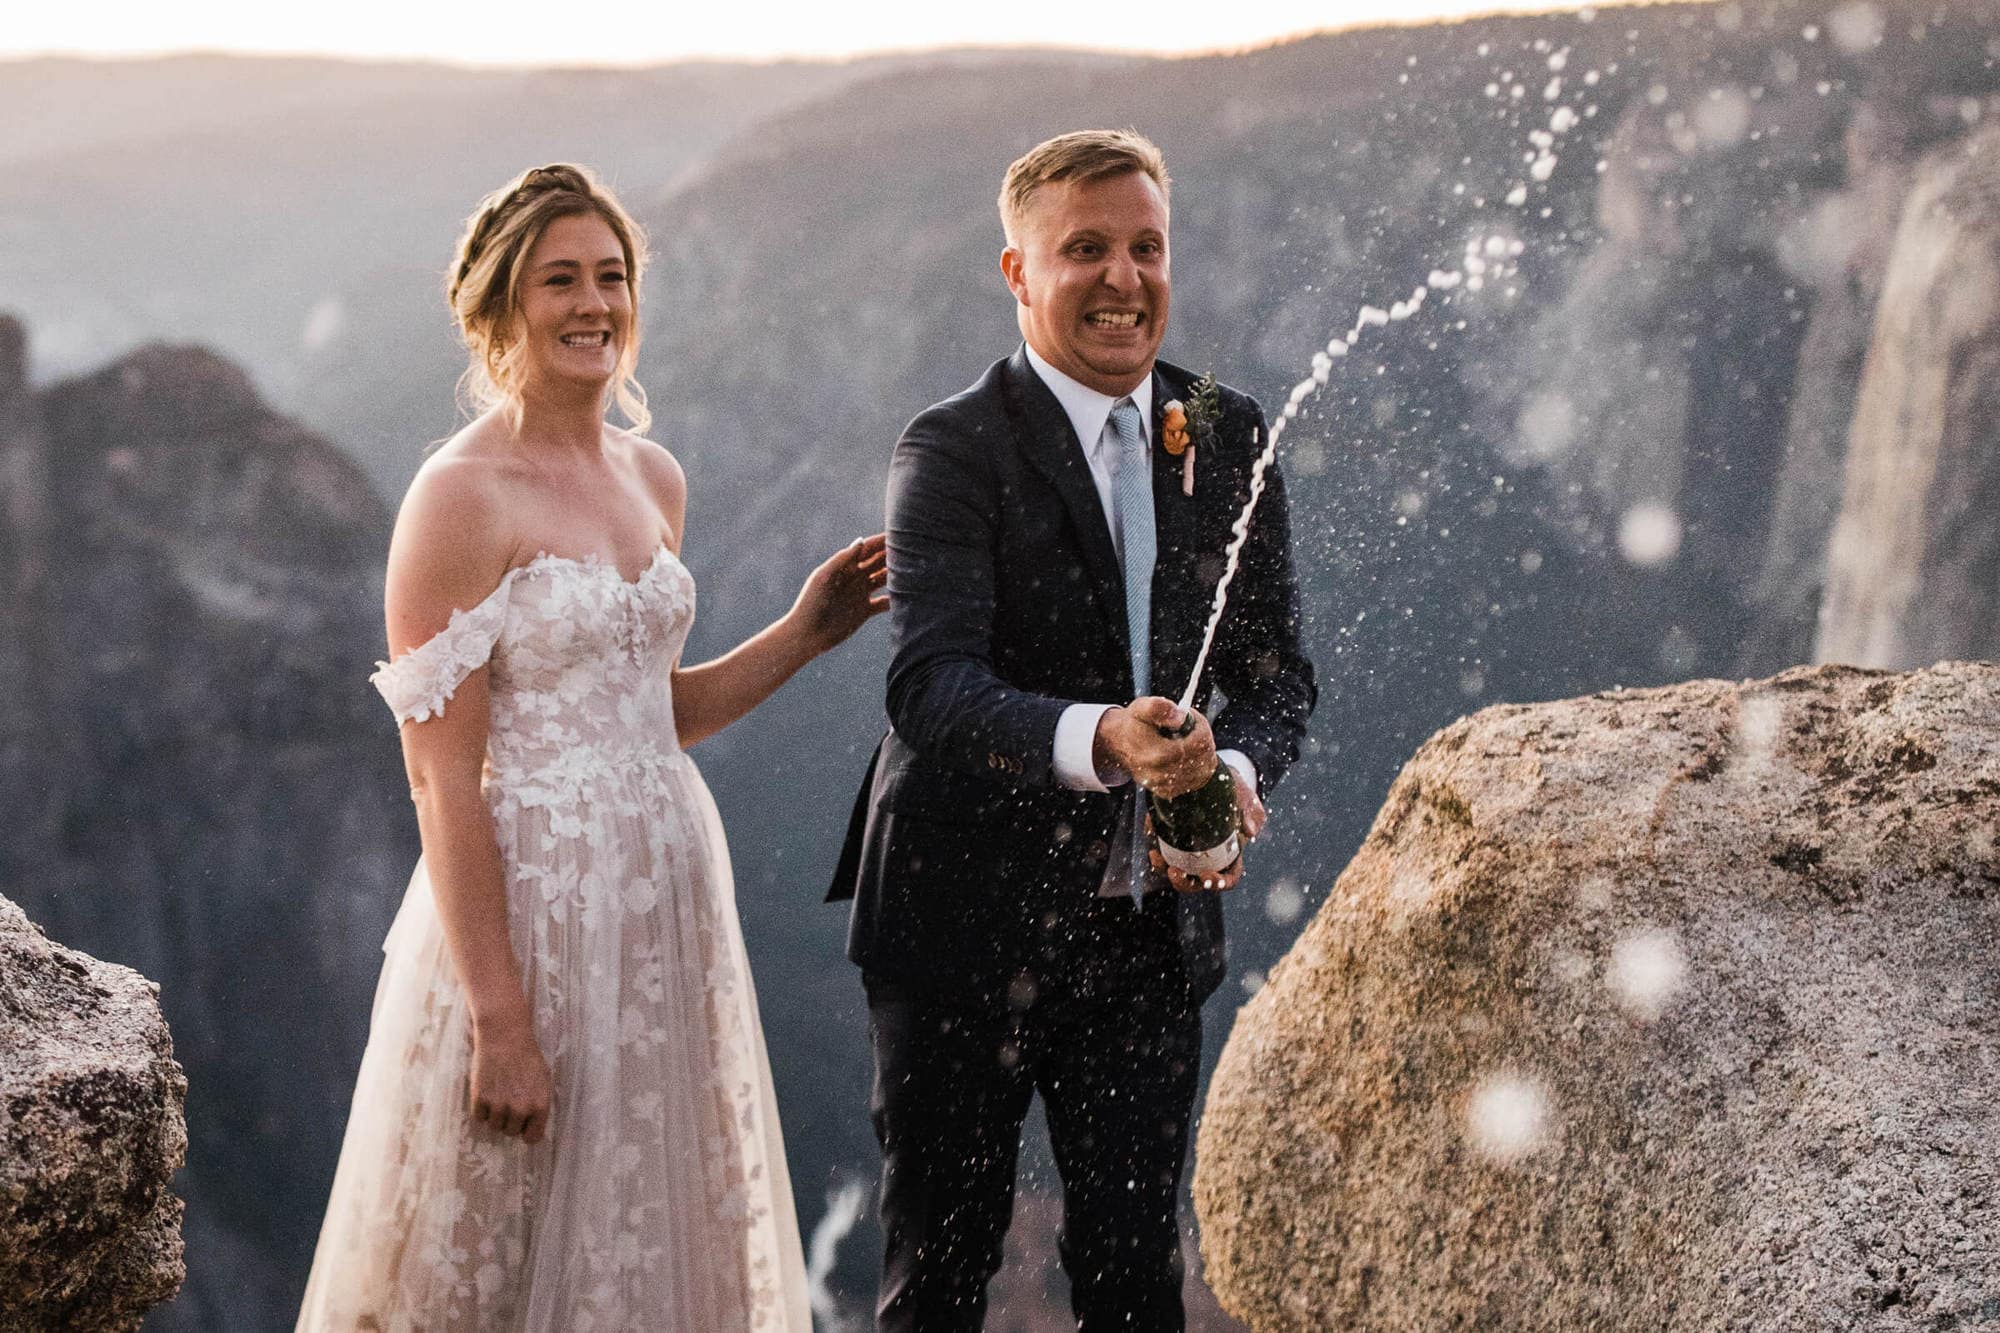 Having a Yosemite wedding is a total dream. This couple adventured around the park in epic fashion and is not to be missed. 